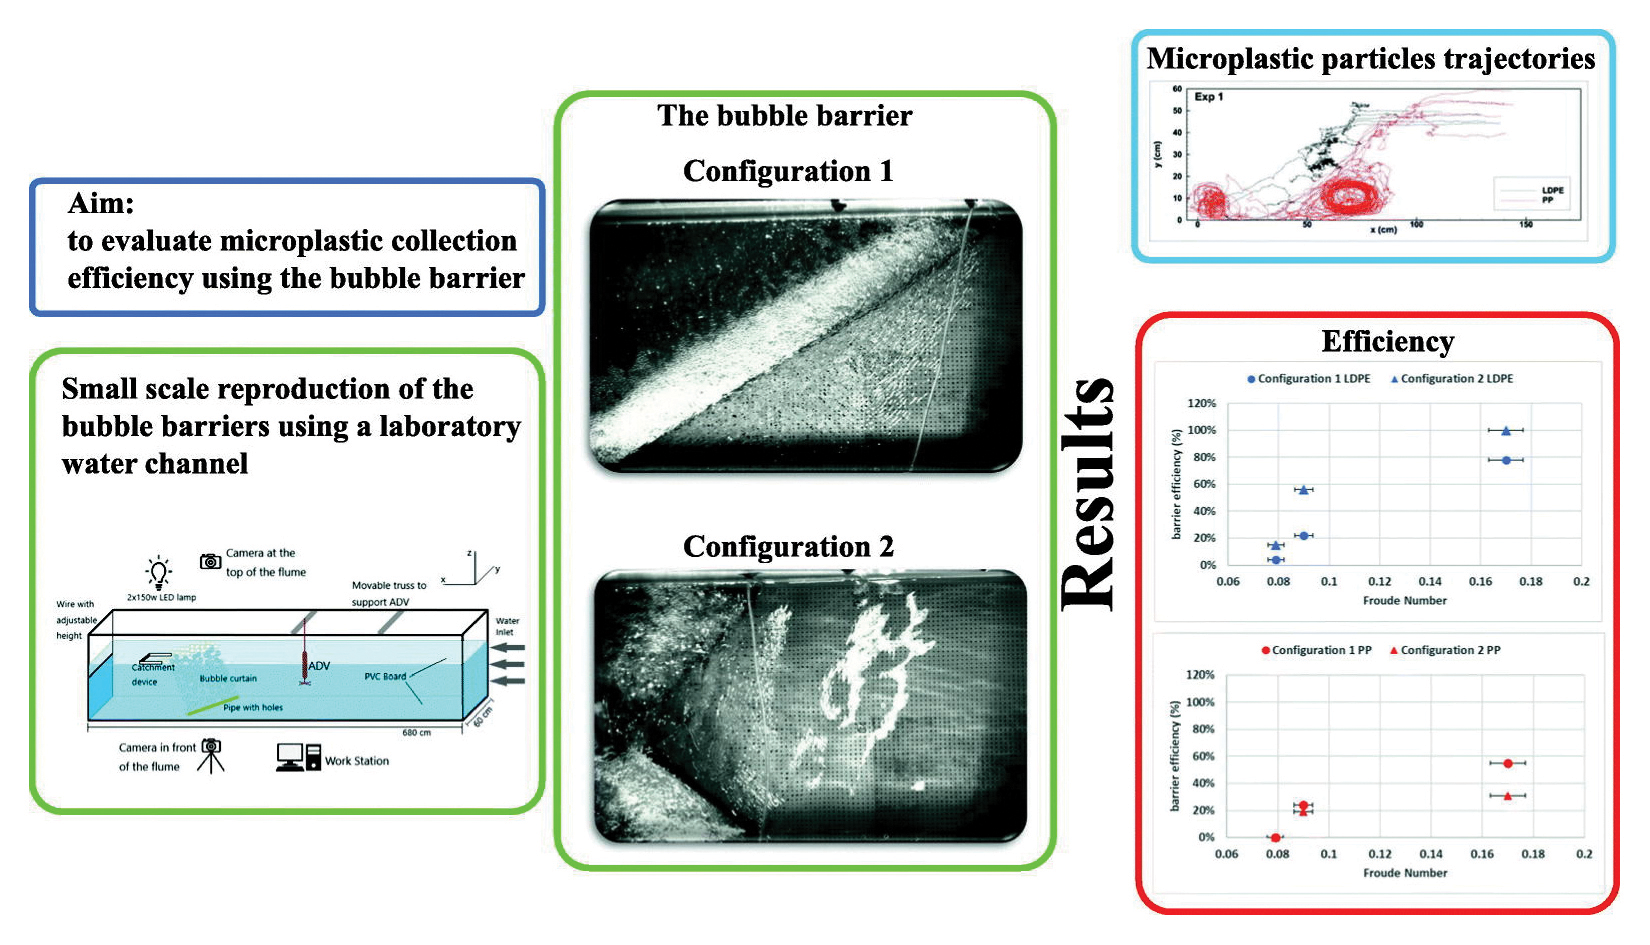 R-Theme 1_Performance assessment of bubbles barriers for microplastic remediation-1-c